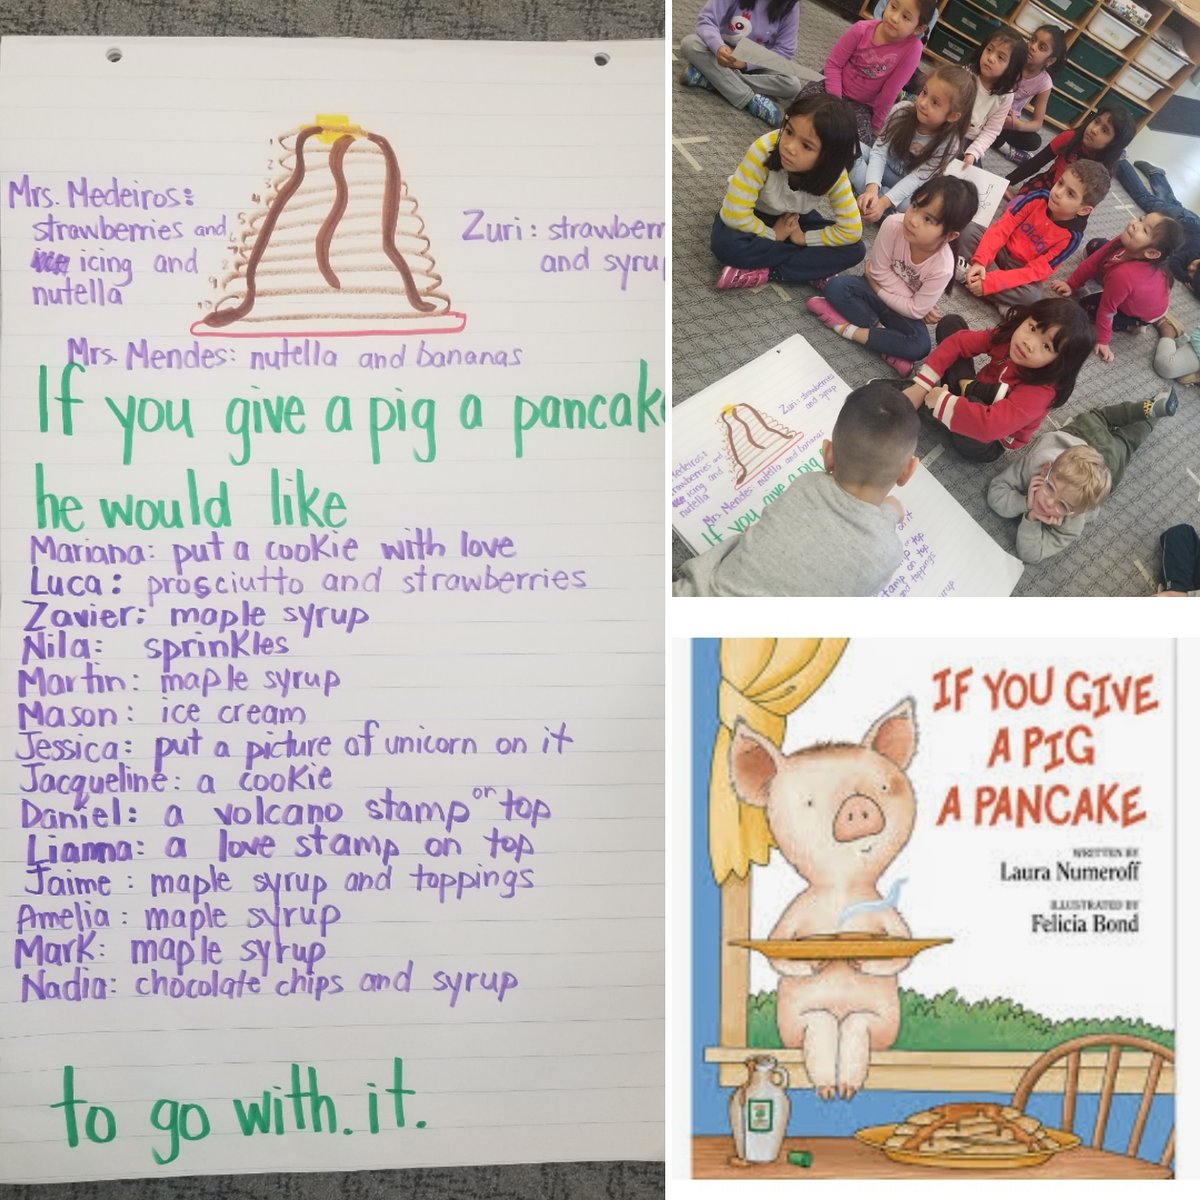 Reading:
 If you give  Pig a Pancake by @LauraNumeroff 

#literacybehaviours #predictions  #imagination #readingstrategies #usinginformationfromtext #usinginformationfrompictures #futureauthours #futureillustrators #exploreplaylearn #learnthroughplayandinquiry